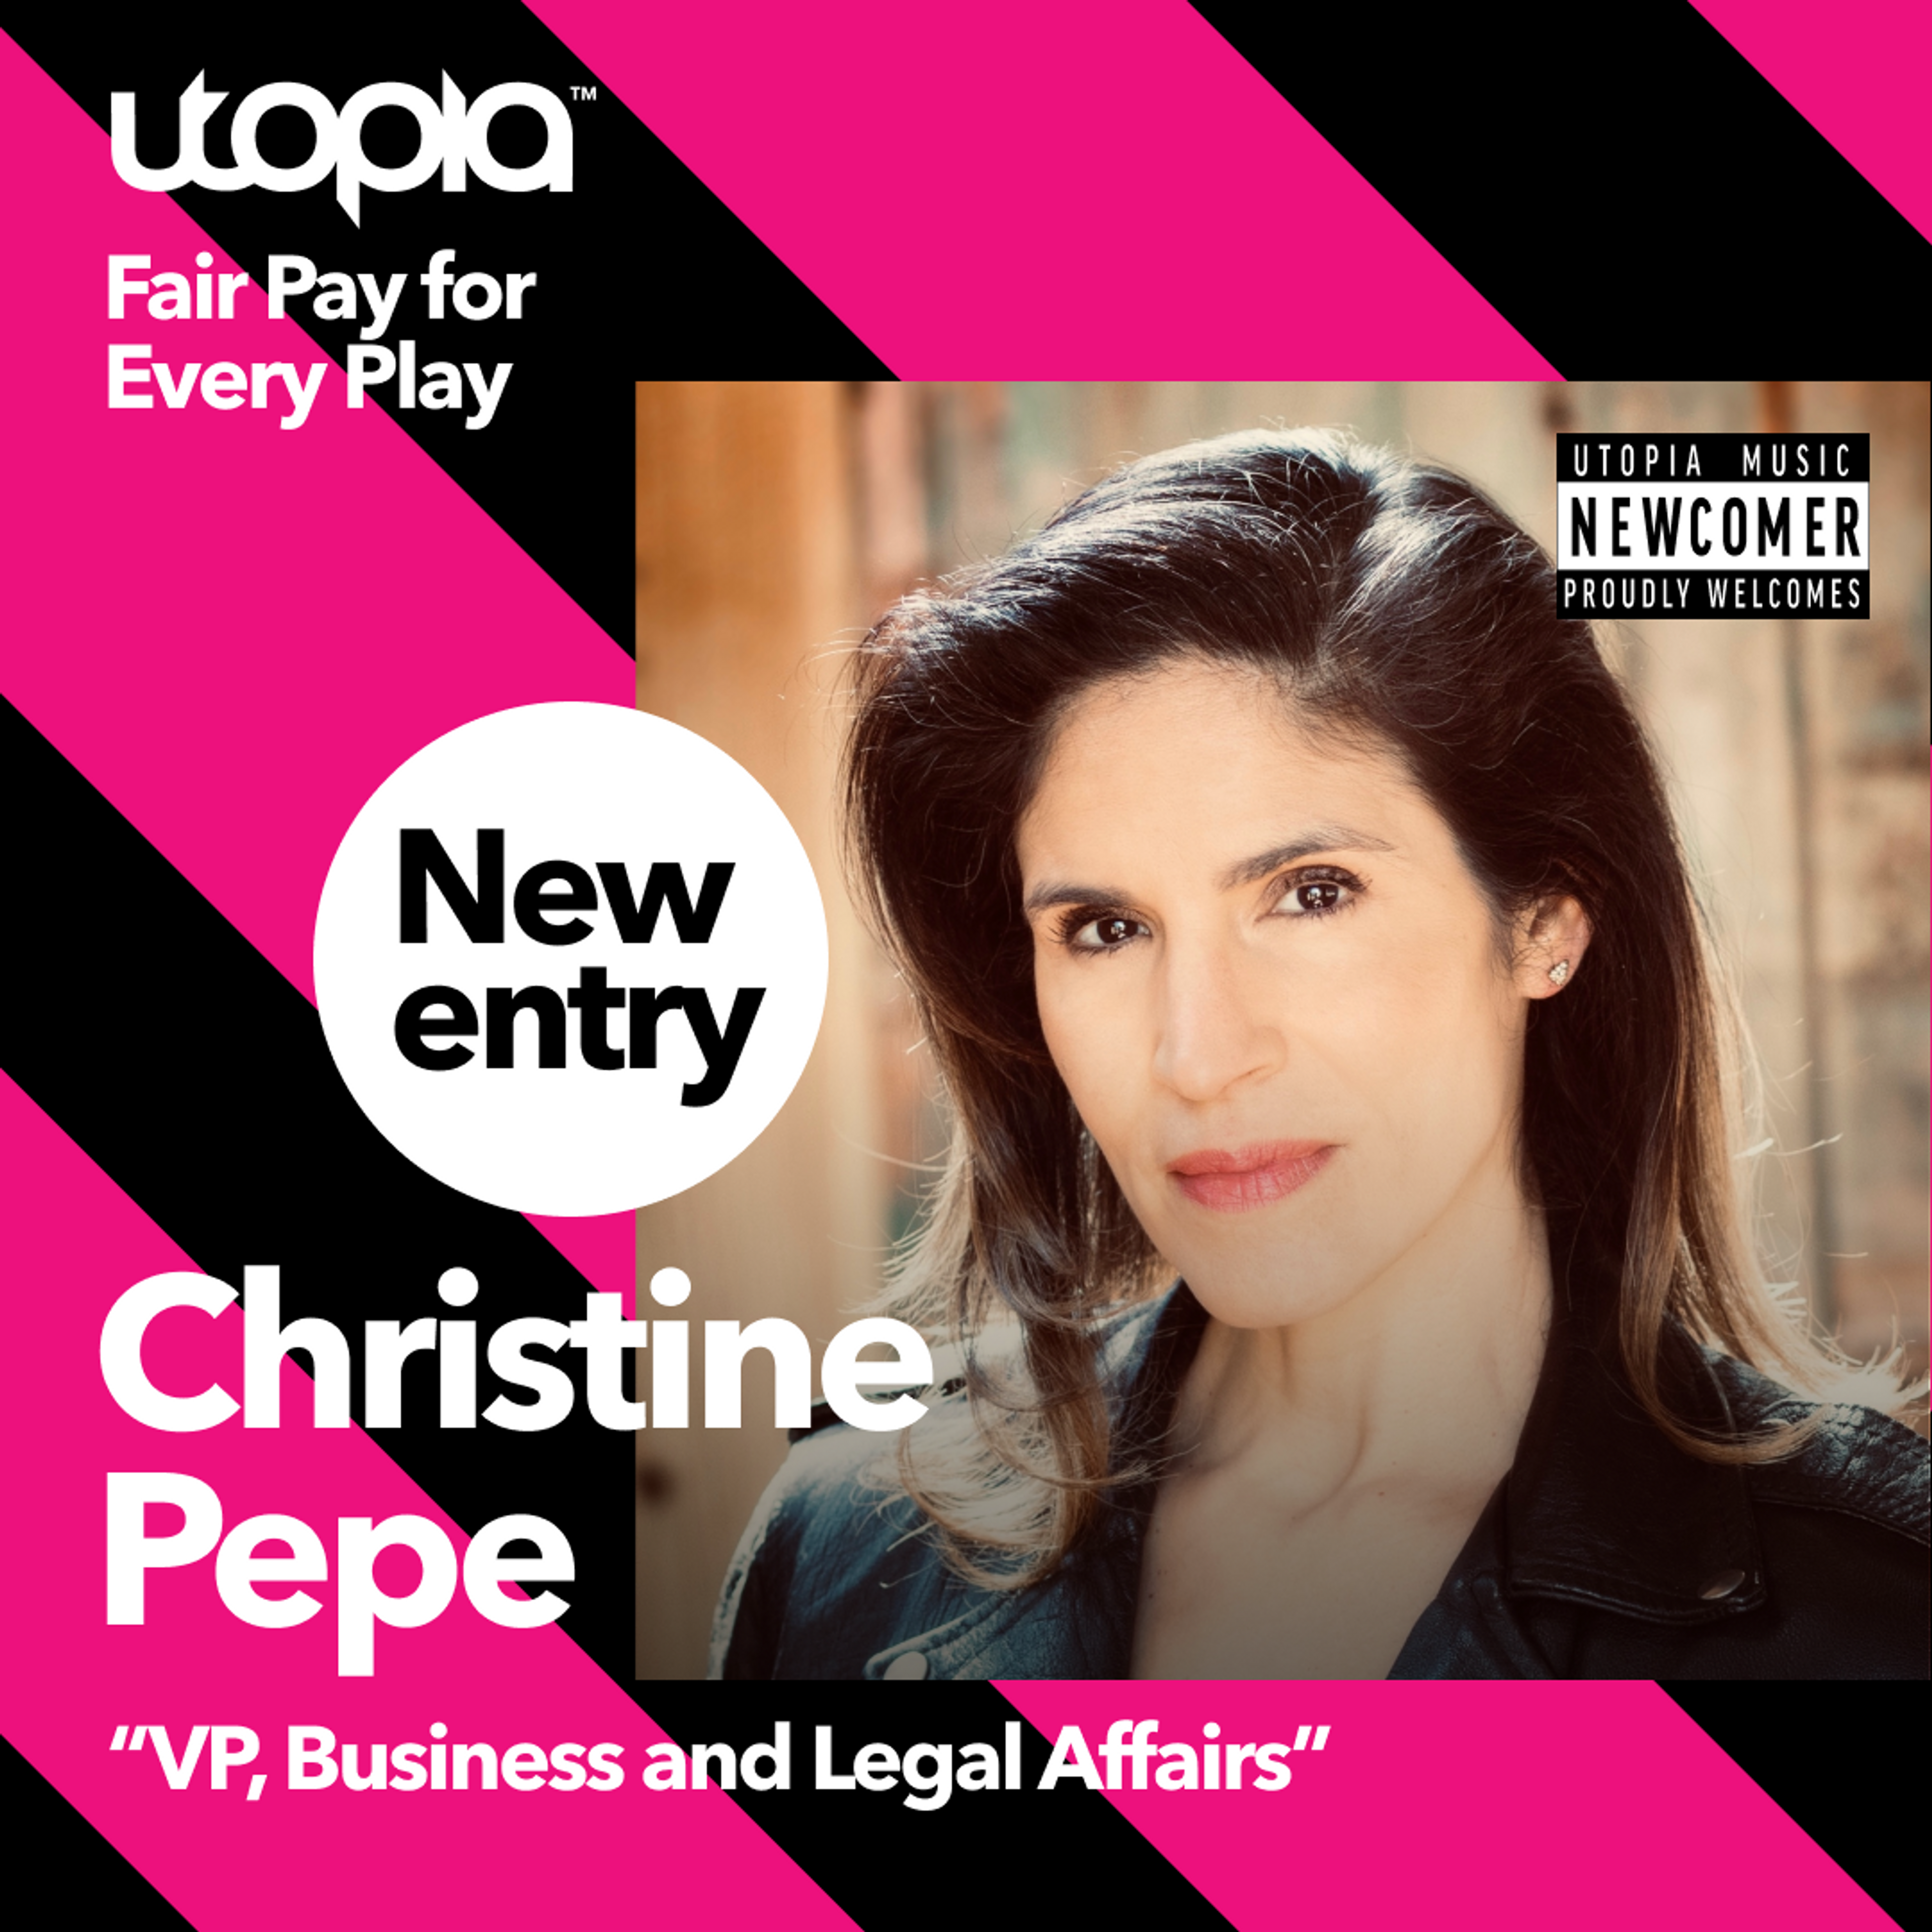 Card image for Christine Pepe joins Utopia as VP, Business and Legals Affairs